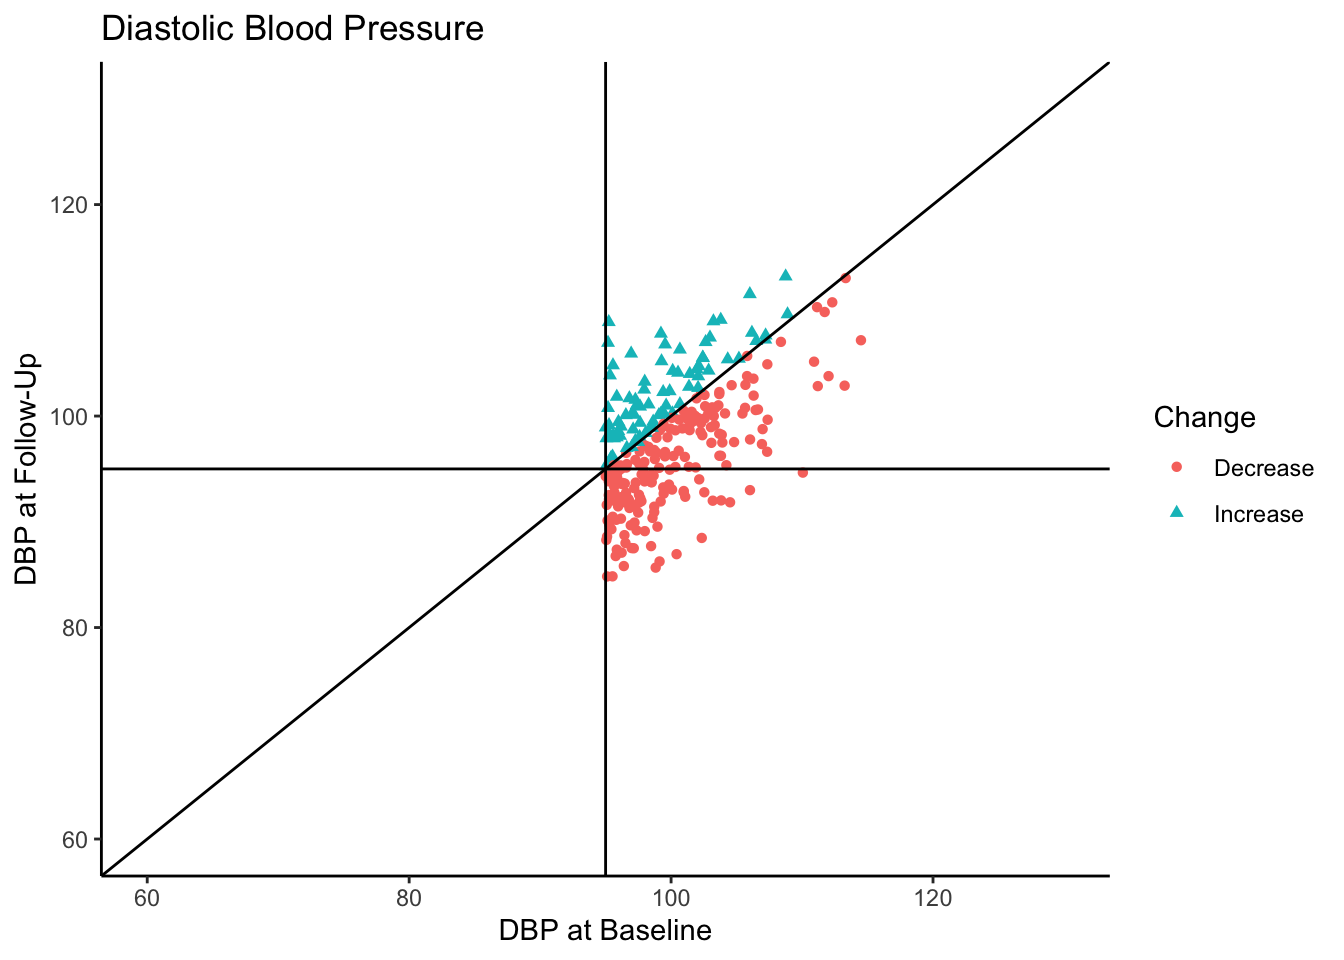 Scatterplot between Baseline and Follow-Up scores, with mean and slope line, color coded by whether or not the individual's DBP increased or decreased, and again only showing those cases which are hypertensive at baseline. More cases decreased than increased.